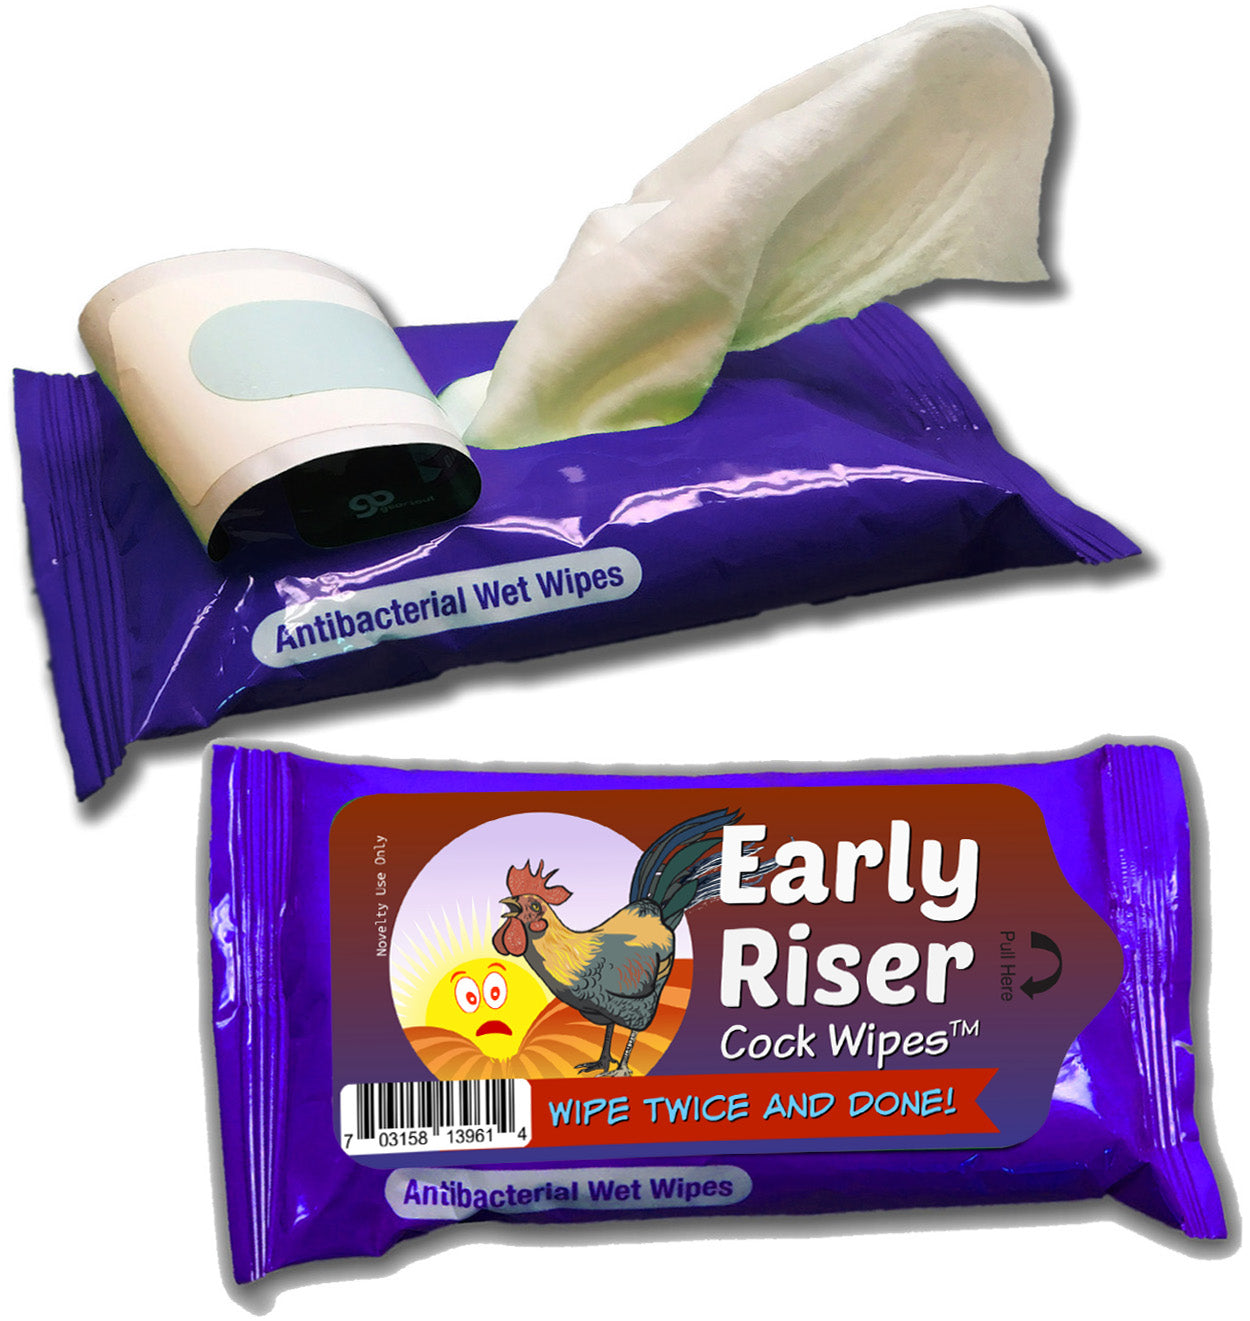 Early Riser Cock Wipes